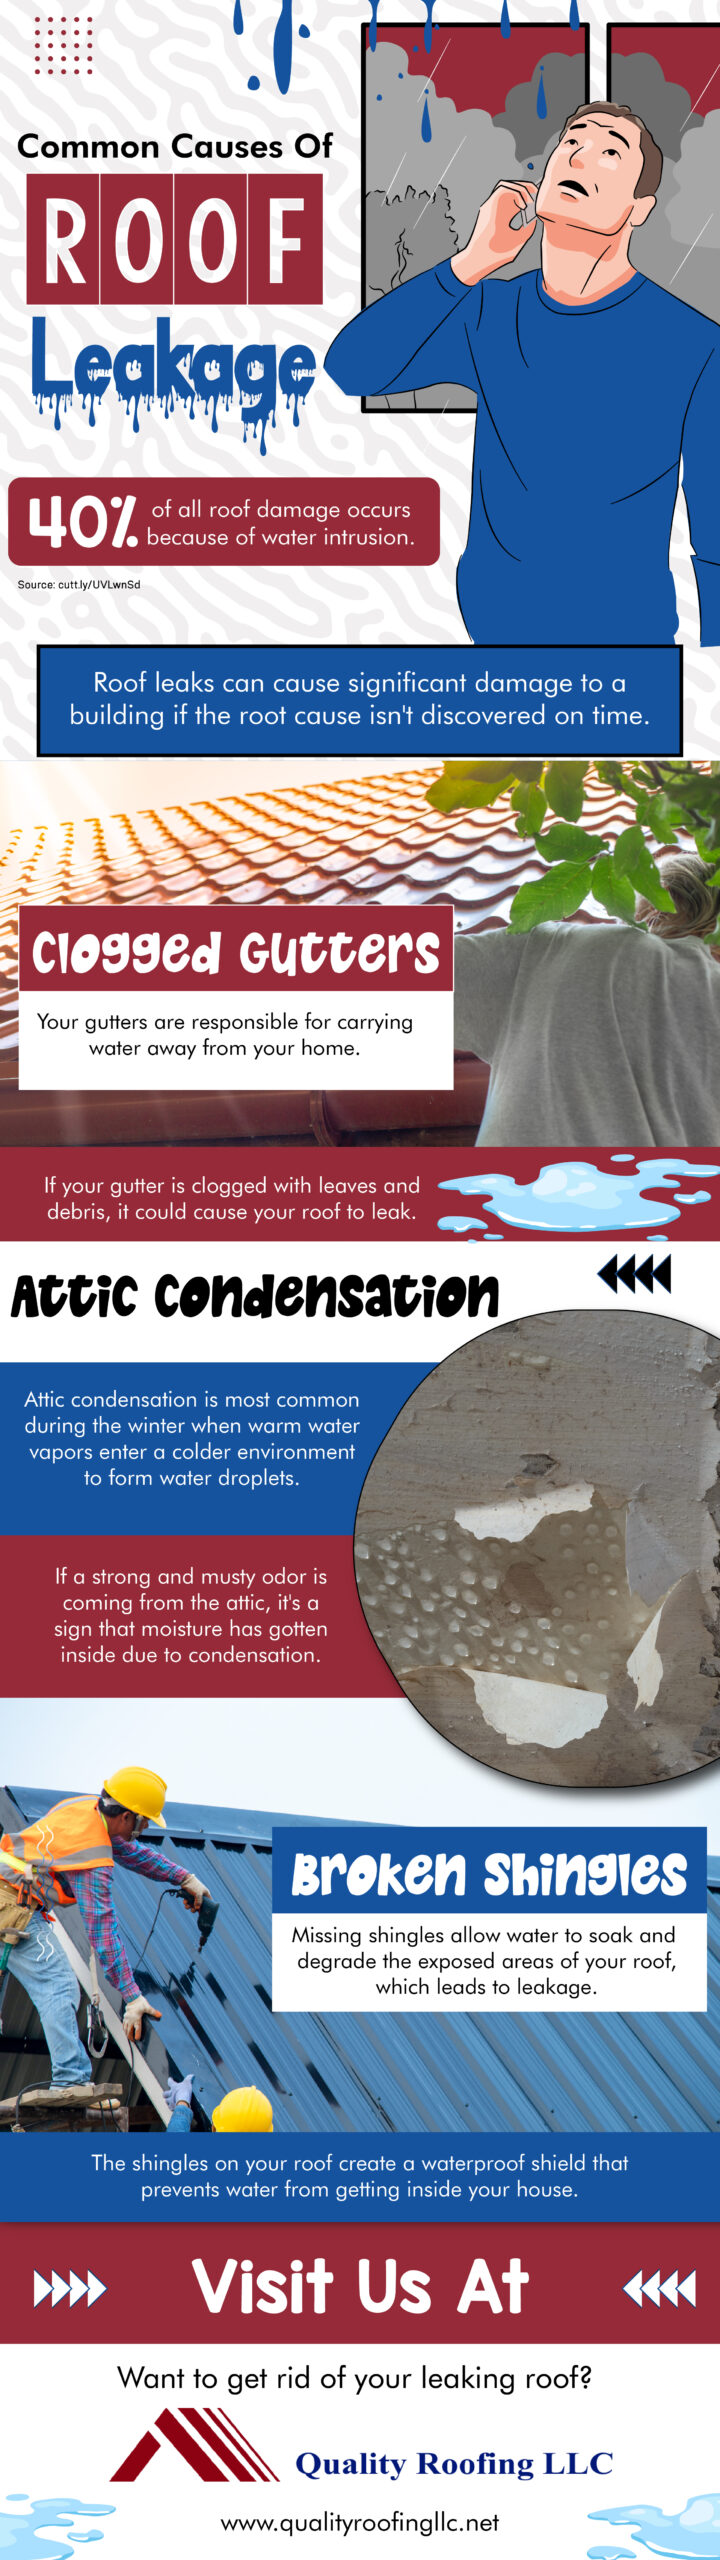 Common Causes Of Roof Leakage - Infograph